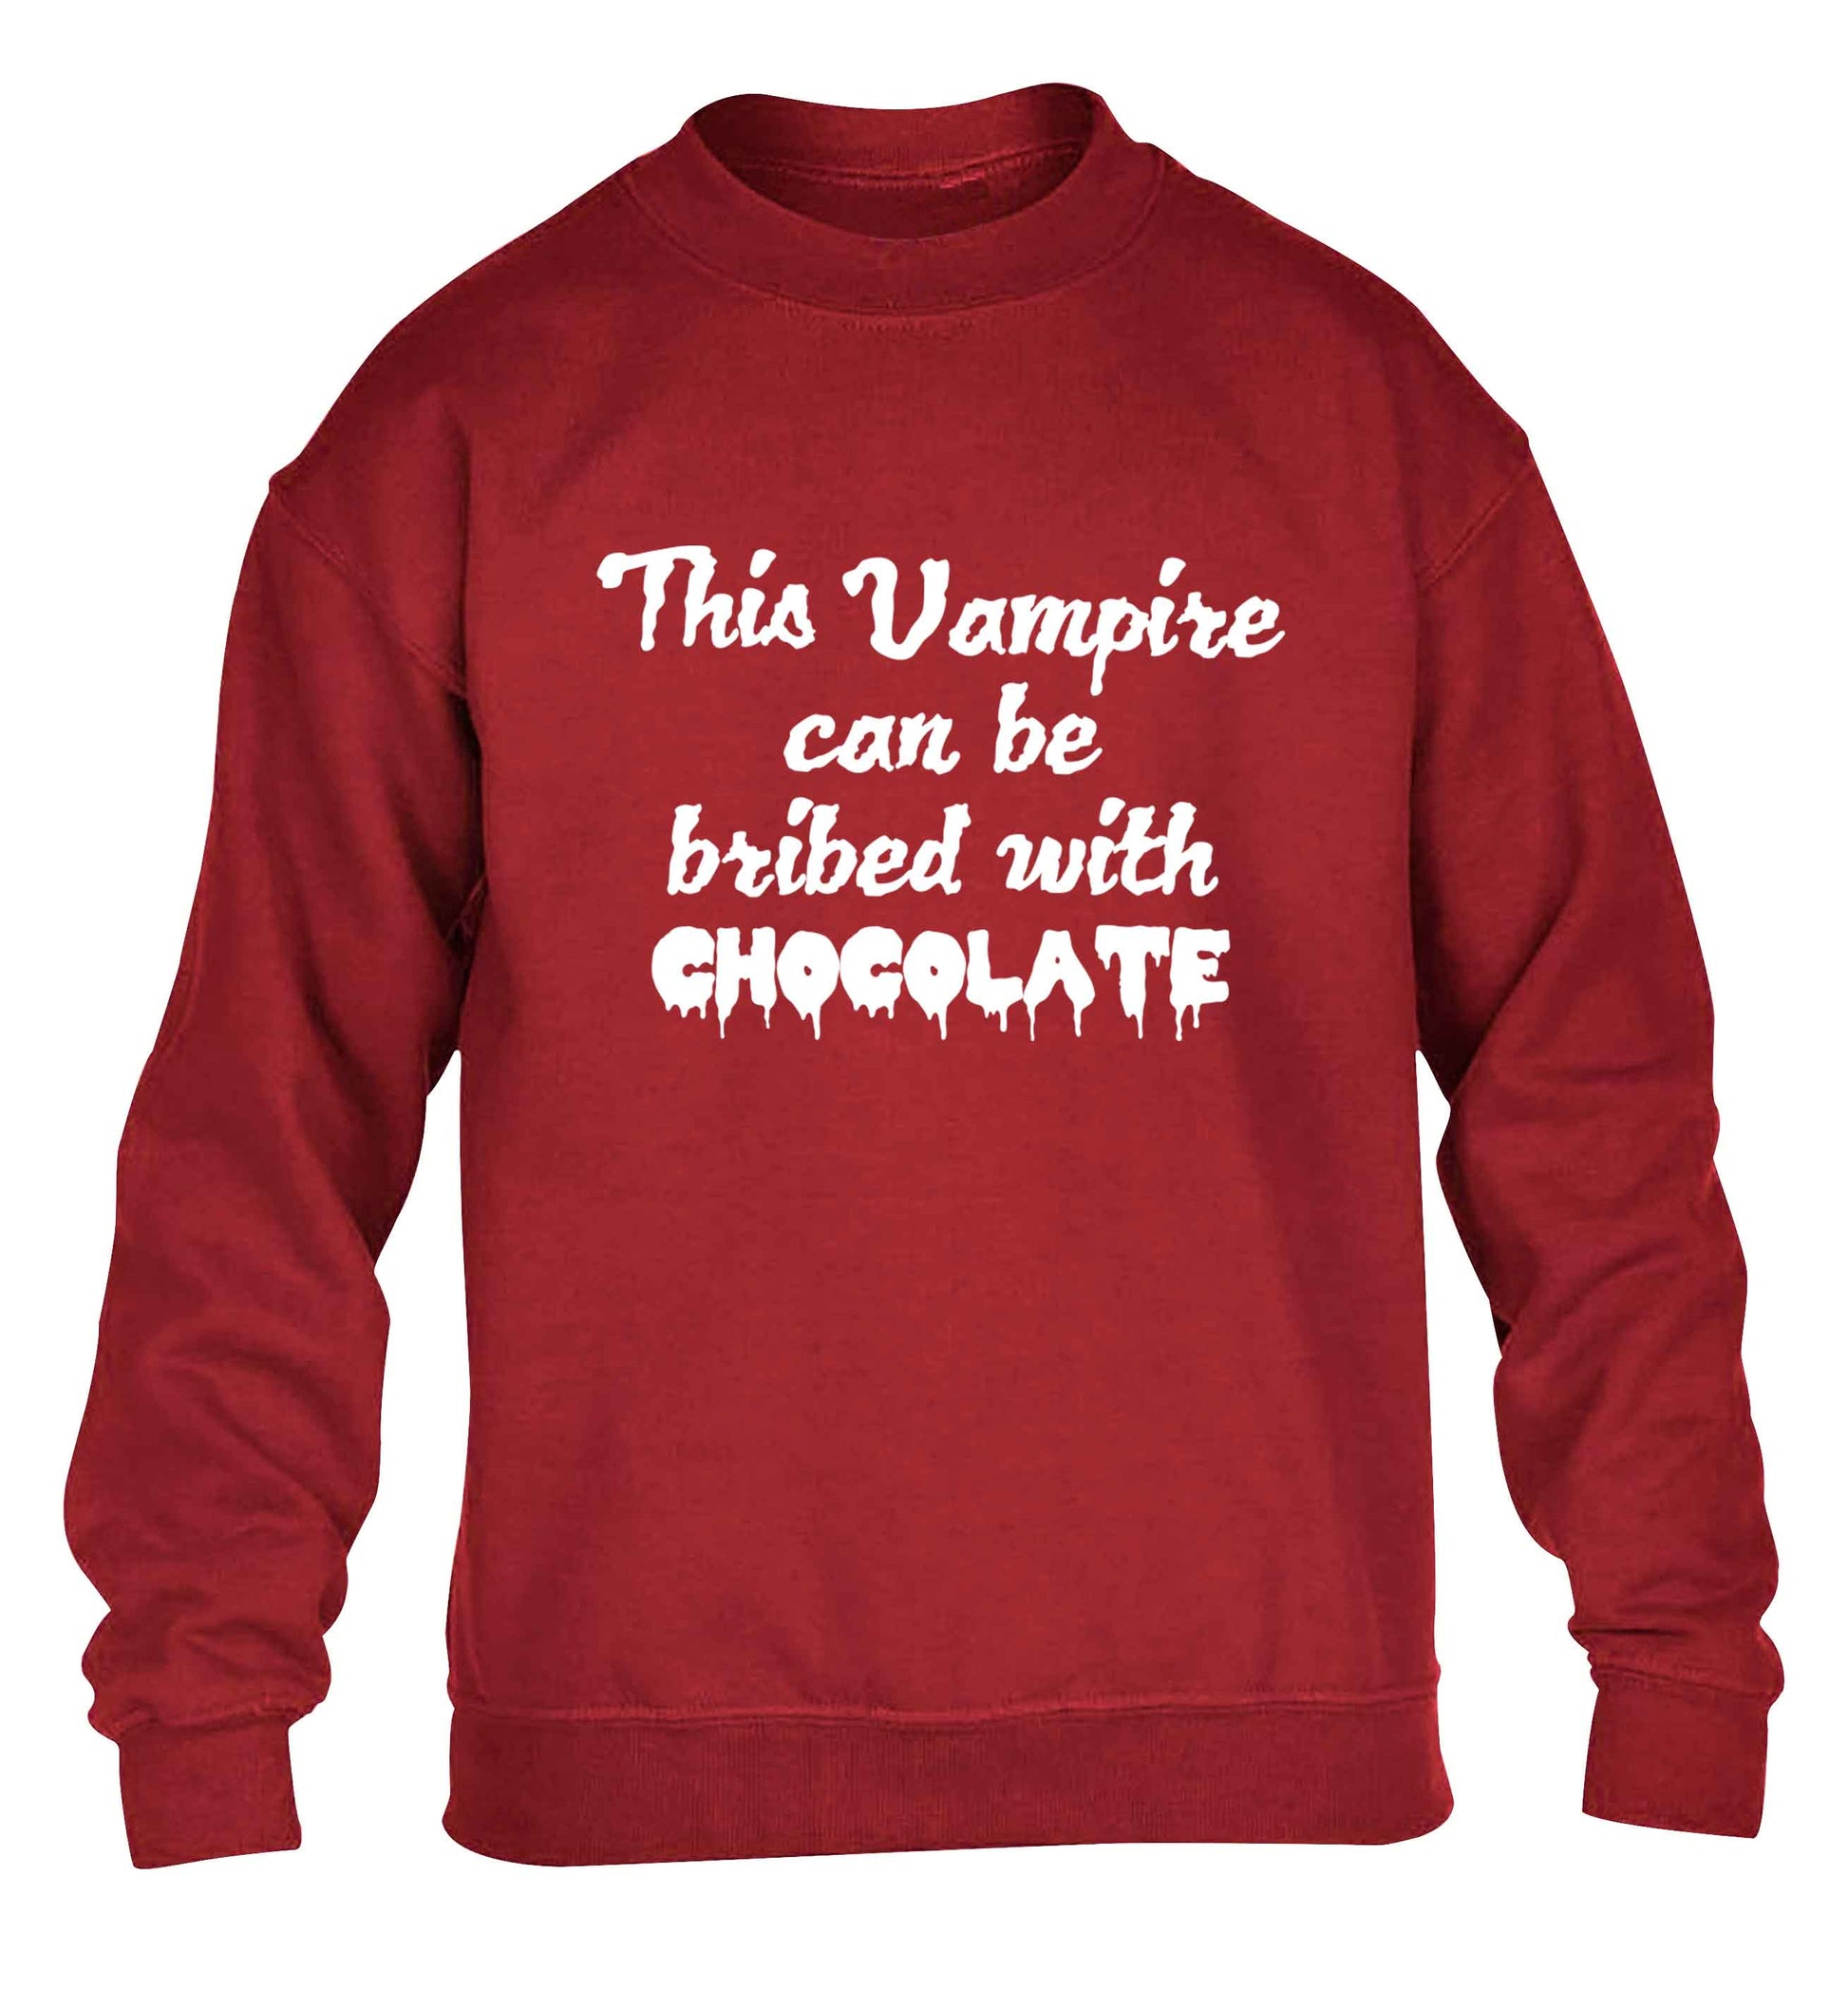 This vampire can be bribed with chocolate children's grey sweater 12-13 Years